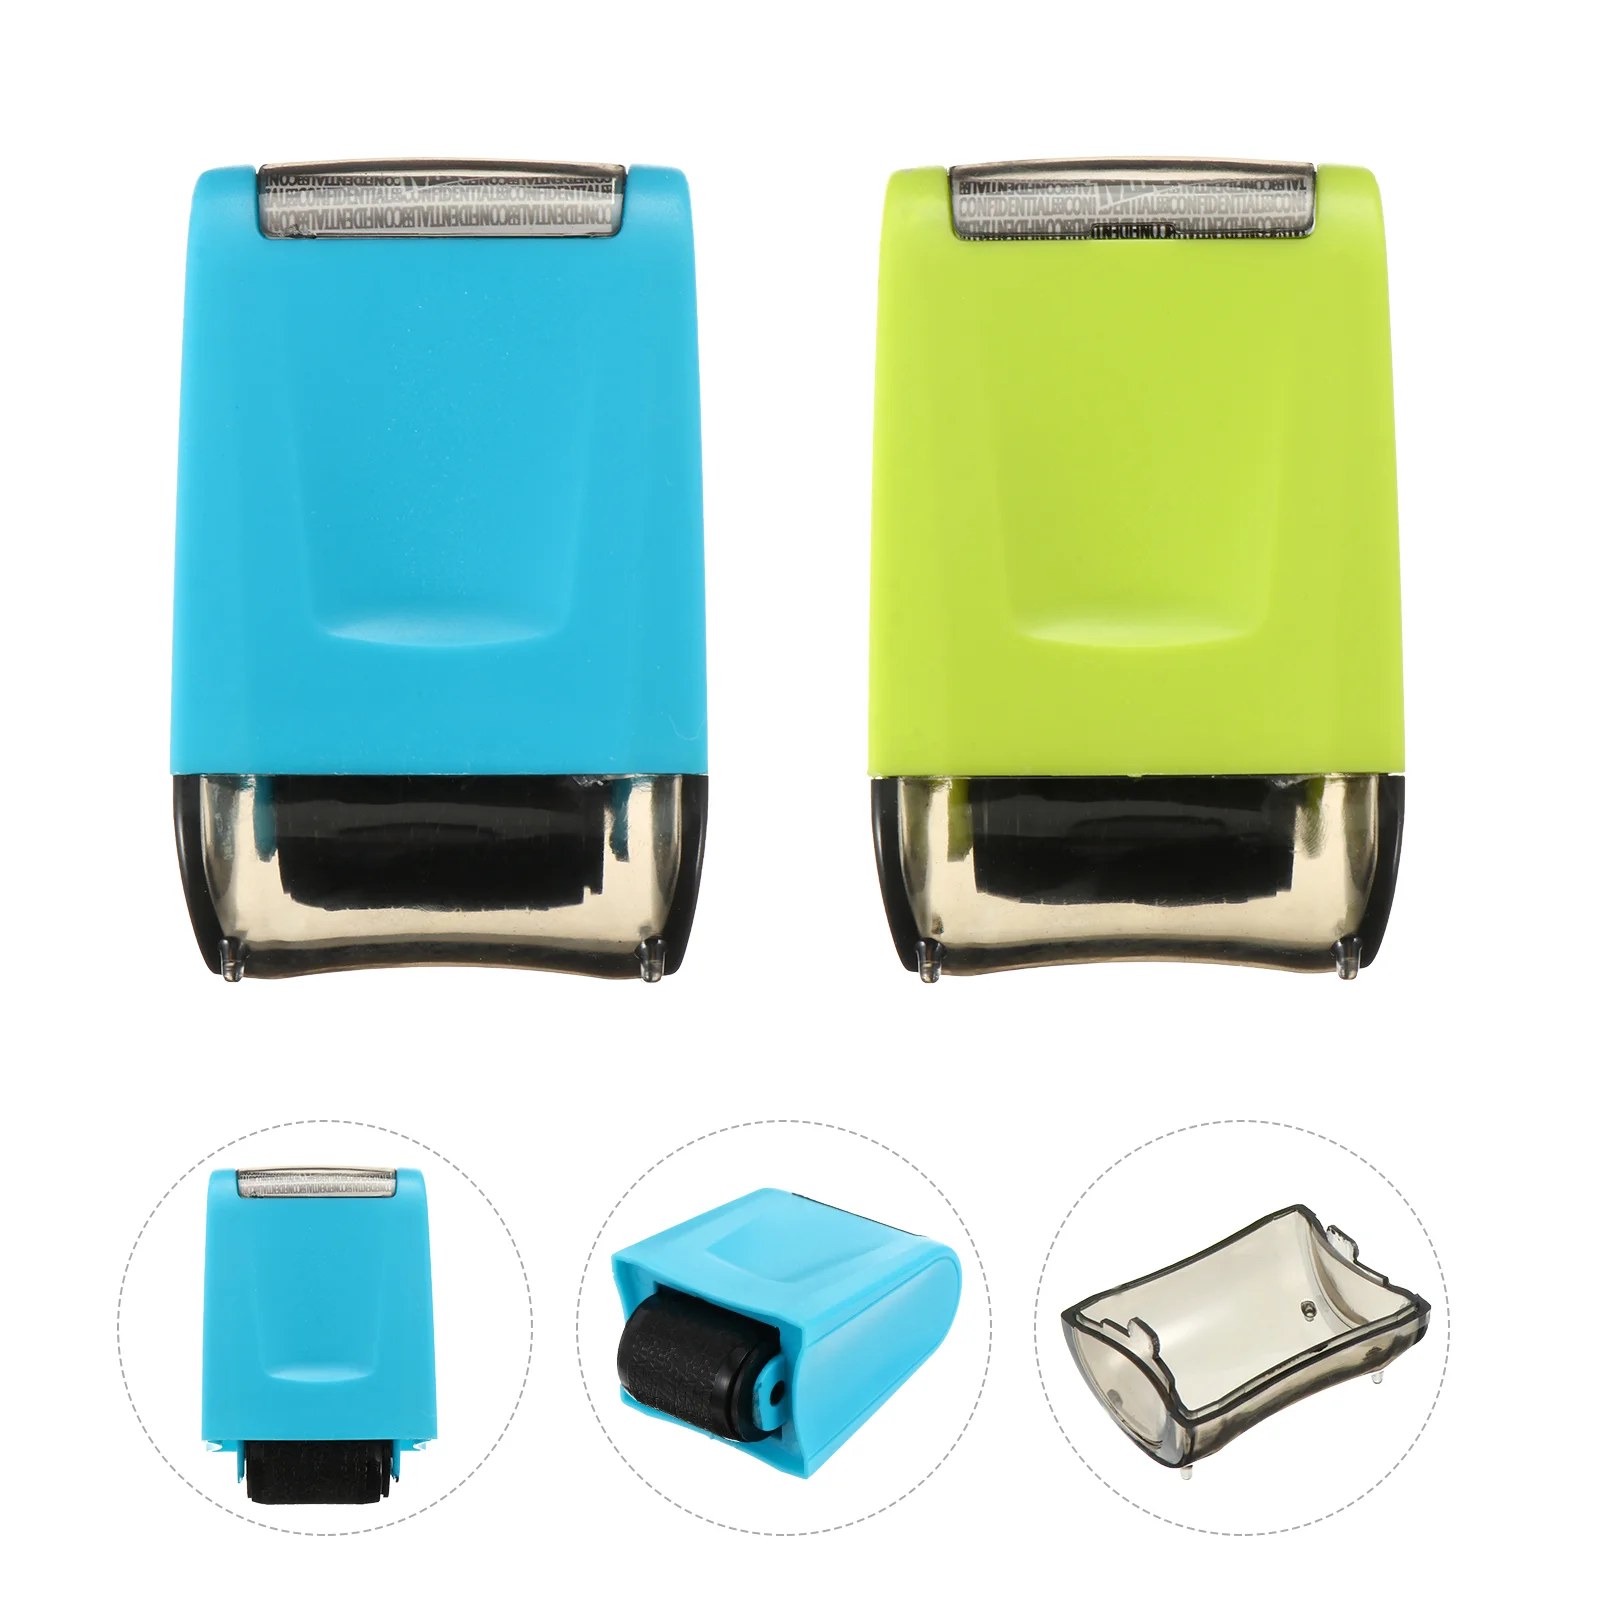 

2 Pcs Seal Name Stamp Hand-held Security Stamps Confidential Plastic Garbled Privacy Identity Guard Seals Protection